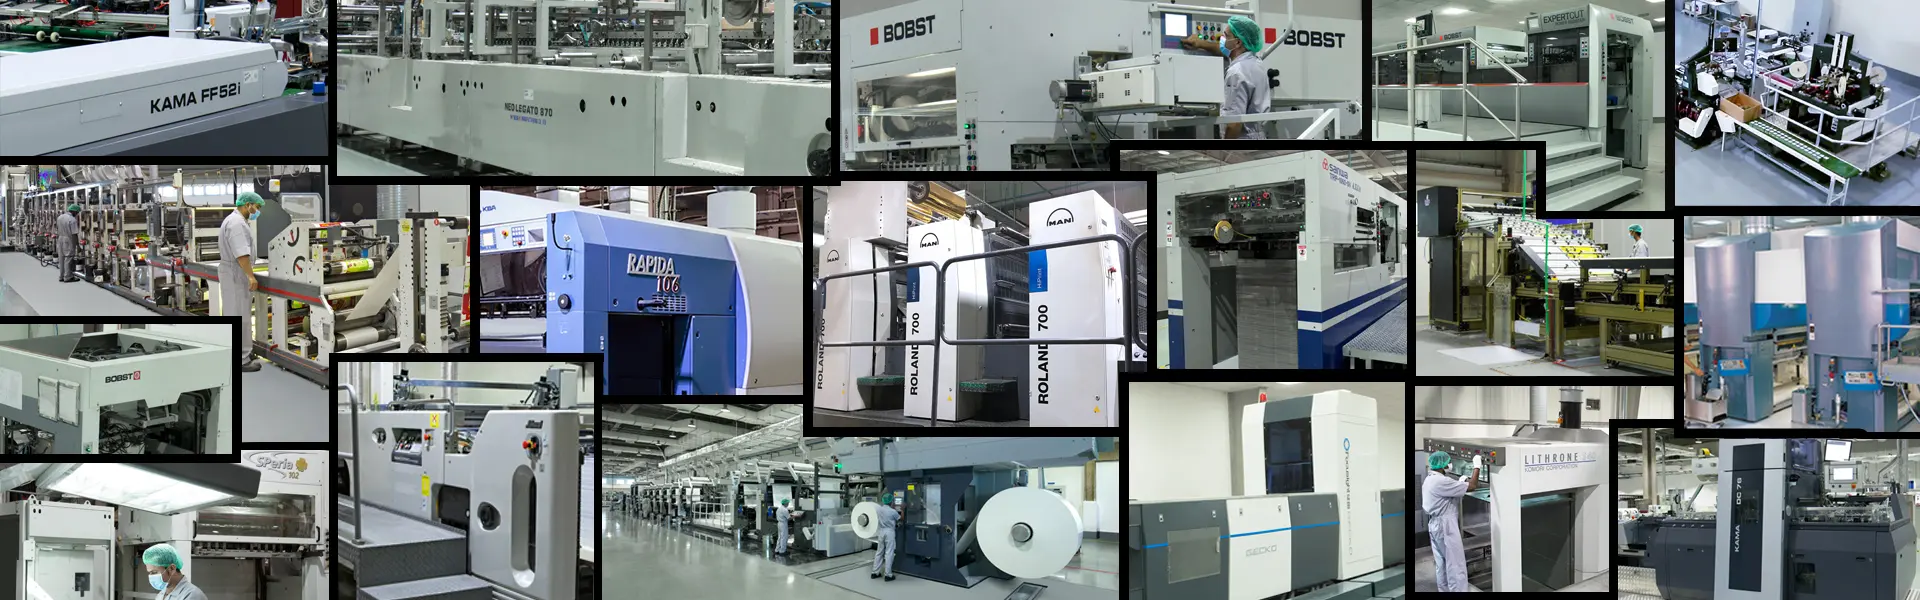 Folding Carton Packaging Products | Packaging Equipment and Machinery | Emirates Printing Press LLC